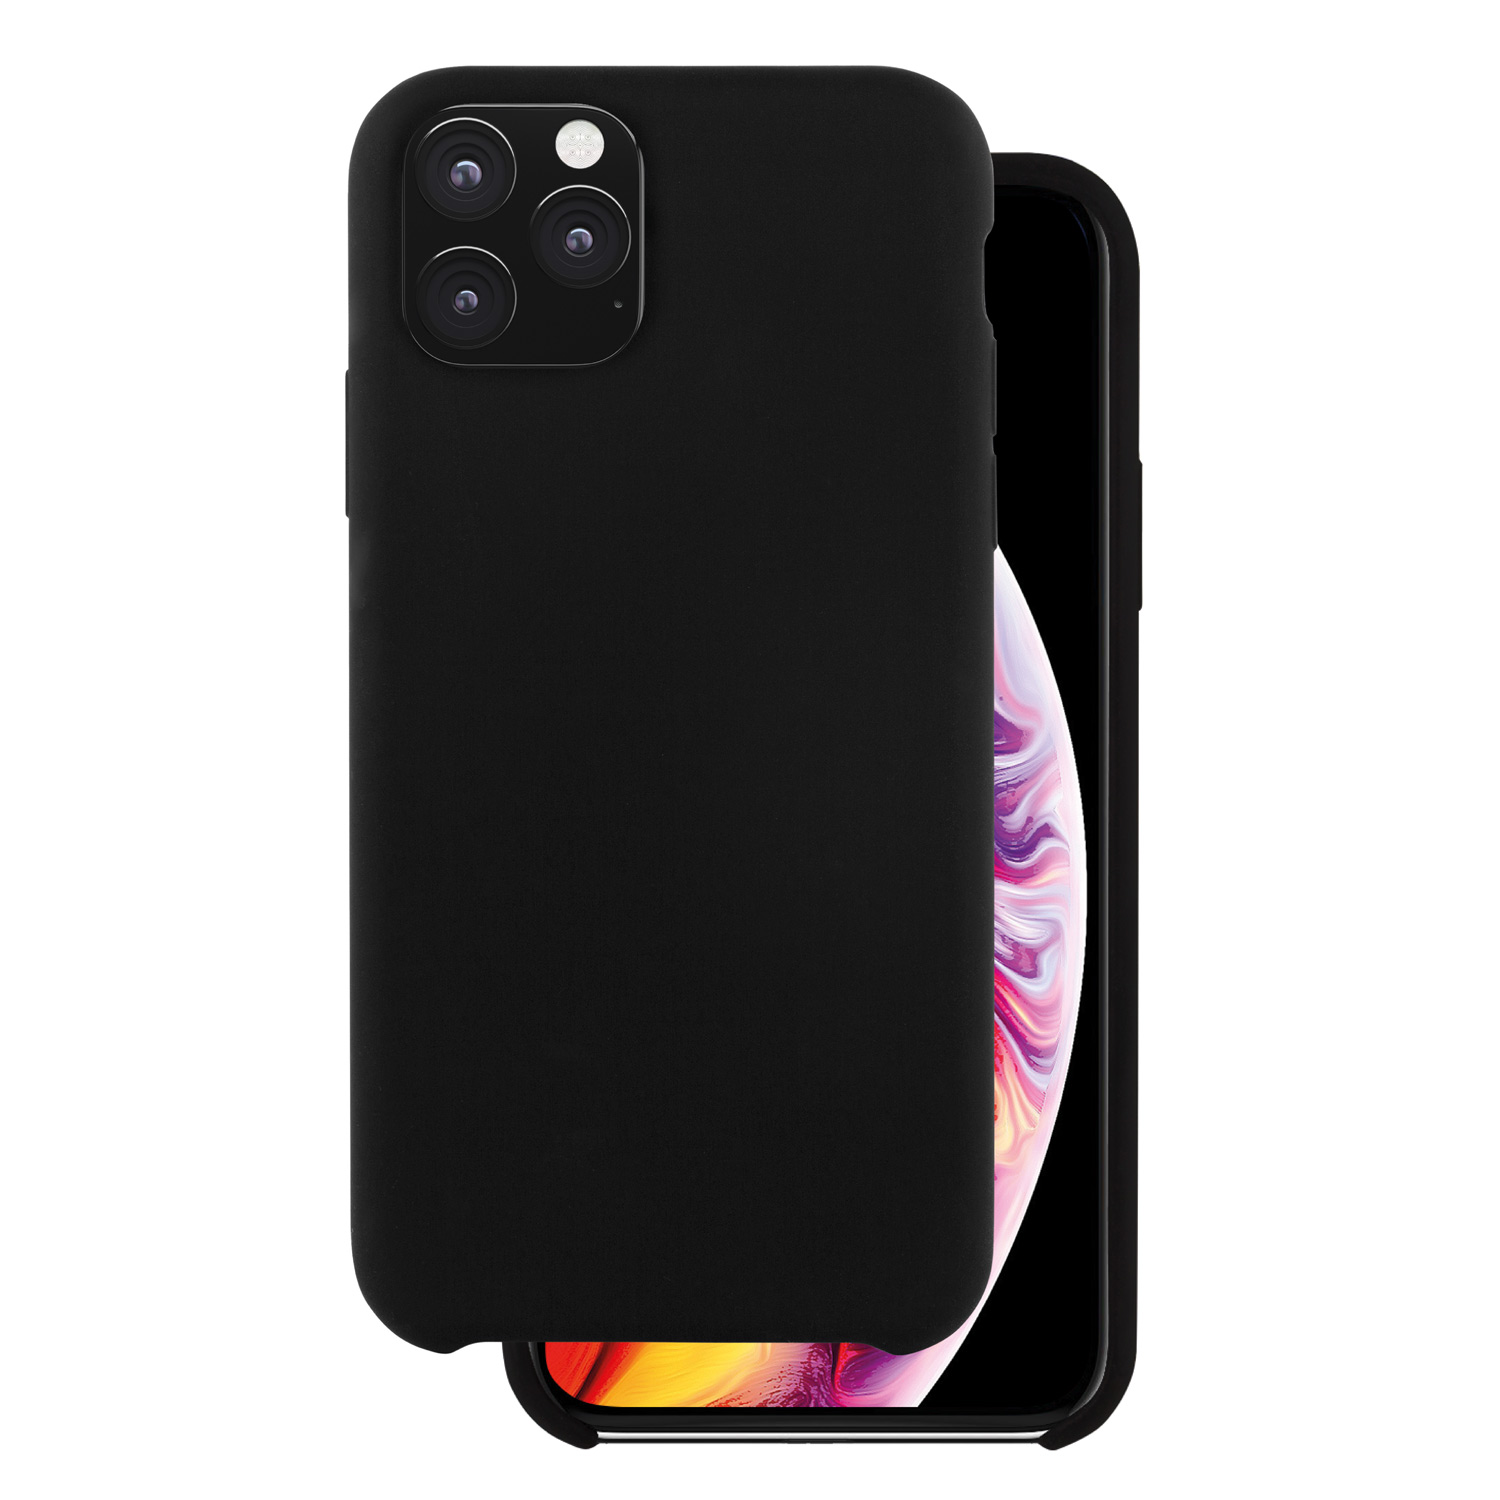 most protective iphone 11 pro max case